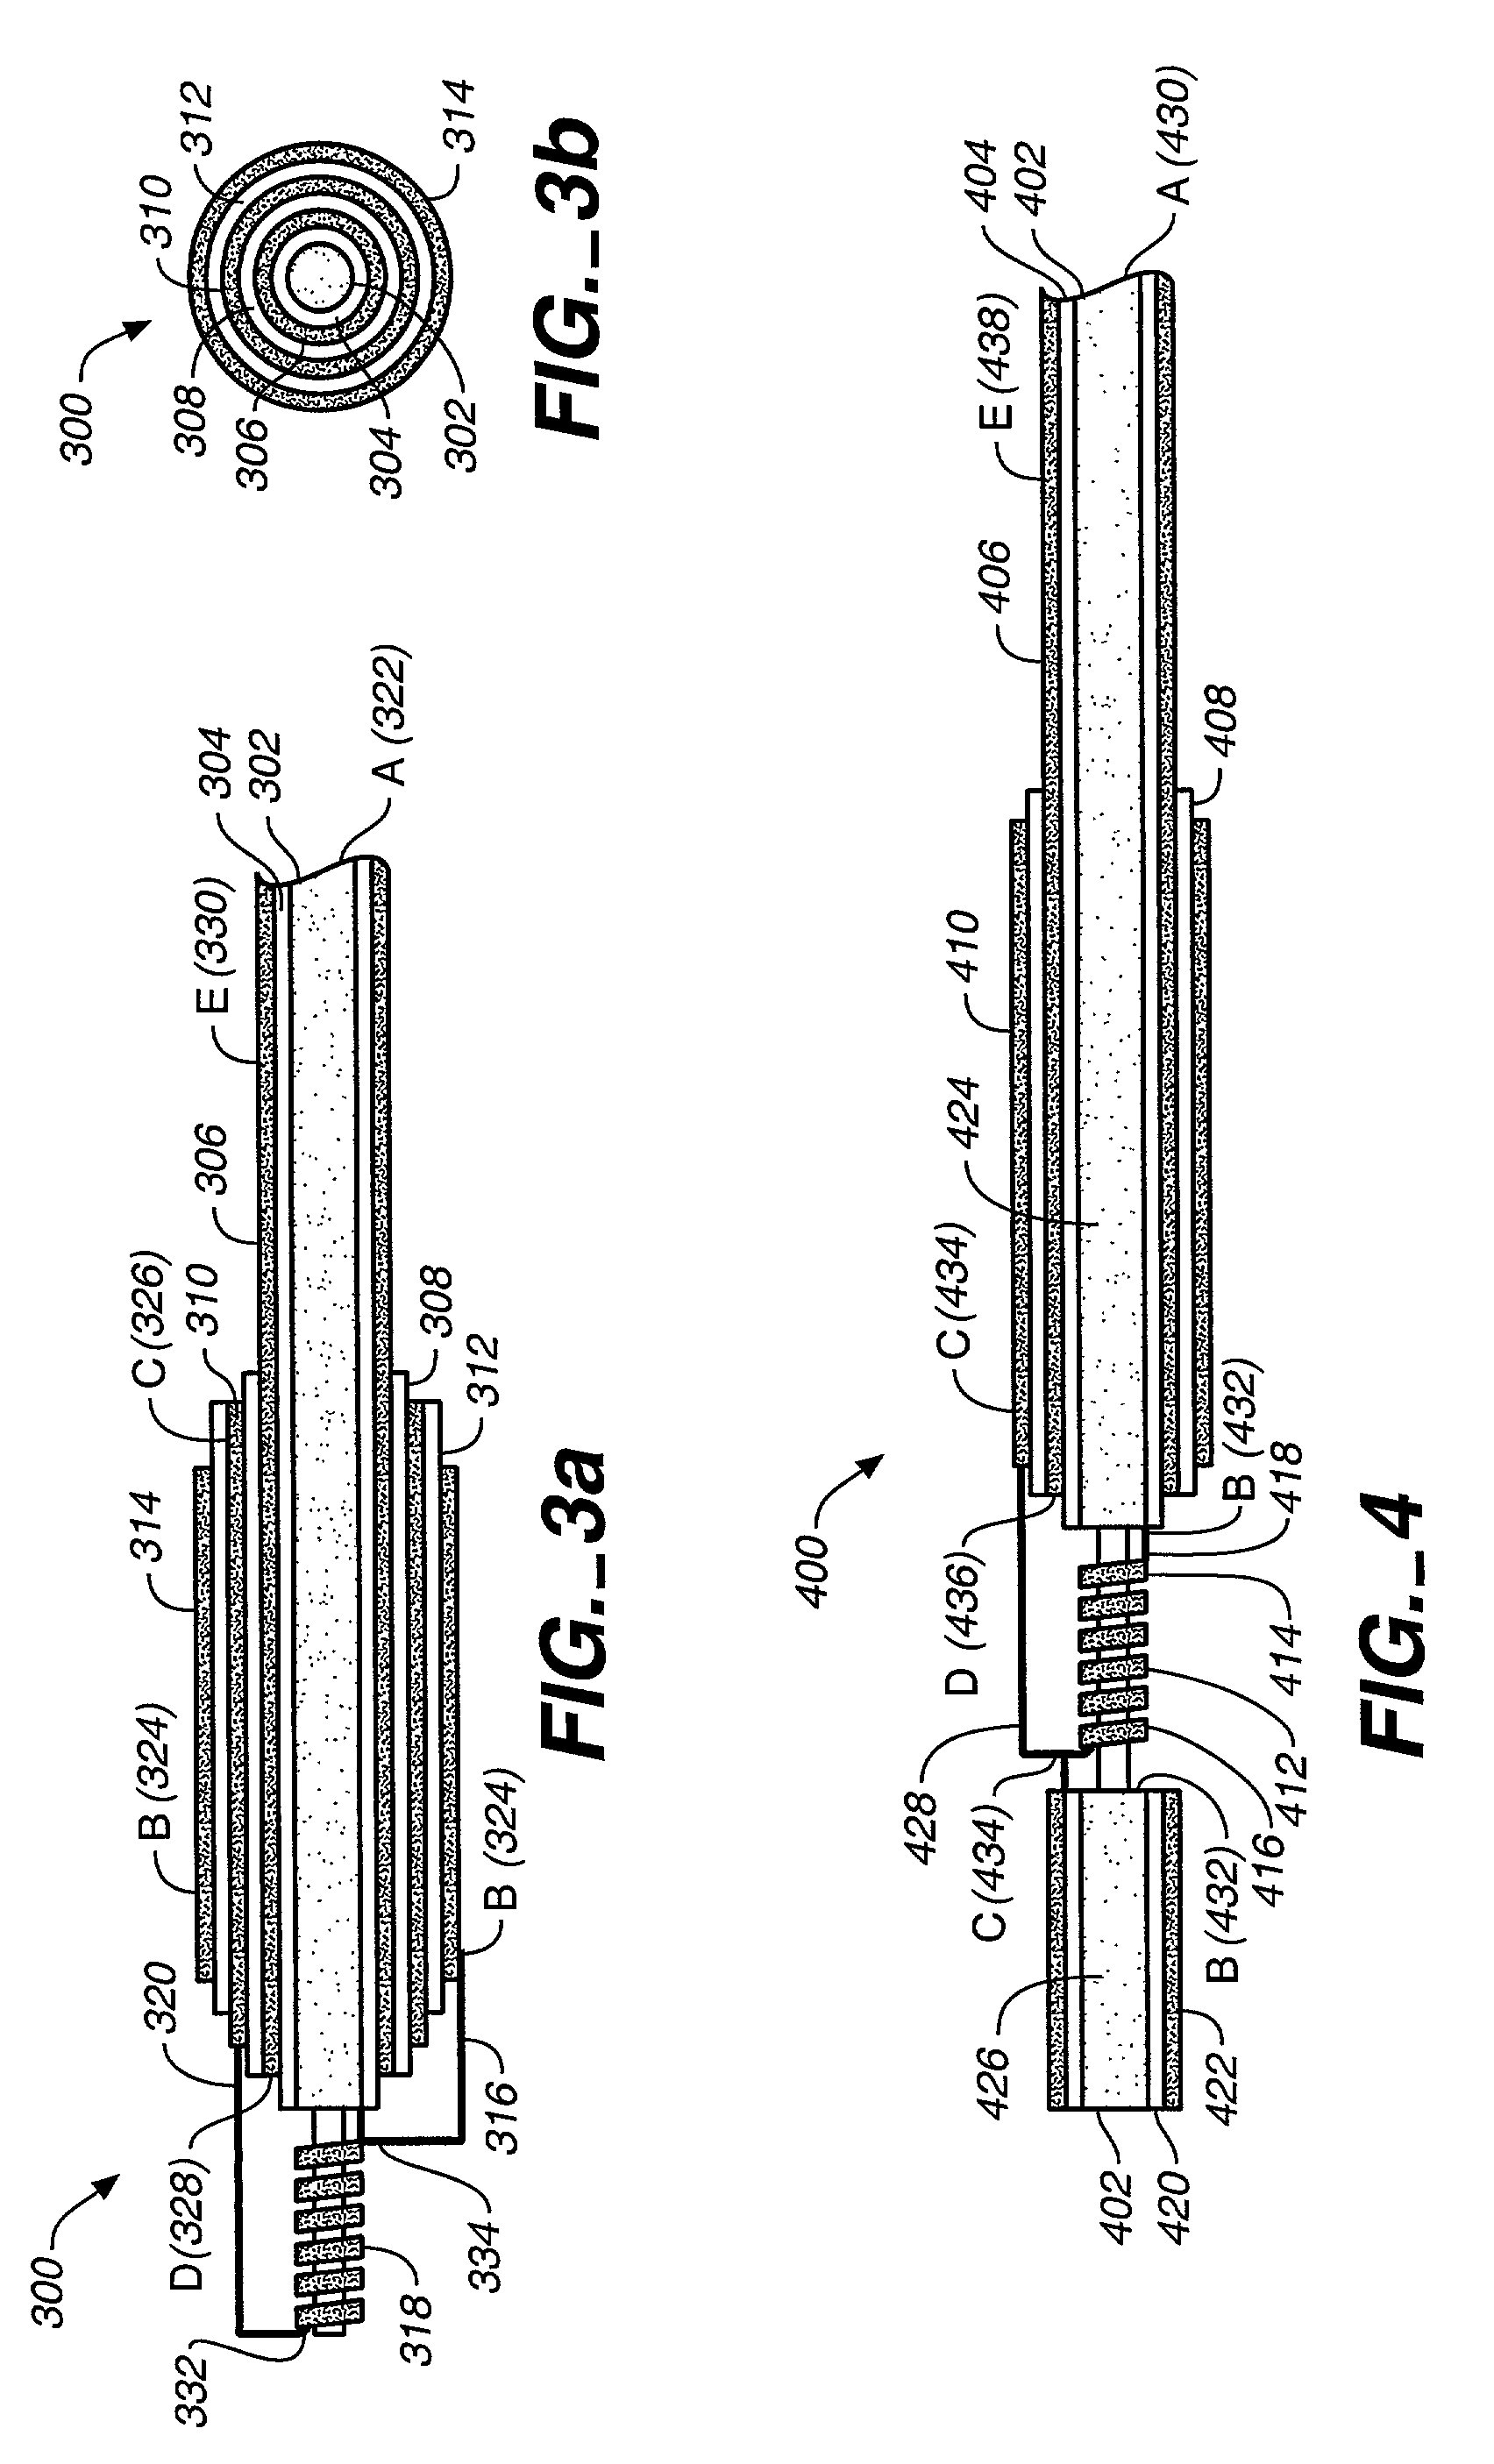 Impedance-matching apparatus and construction for intravascular device